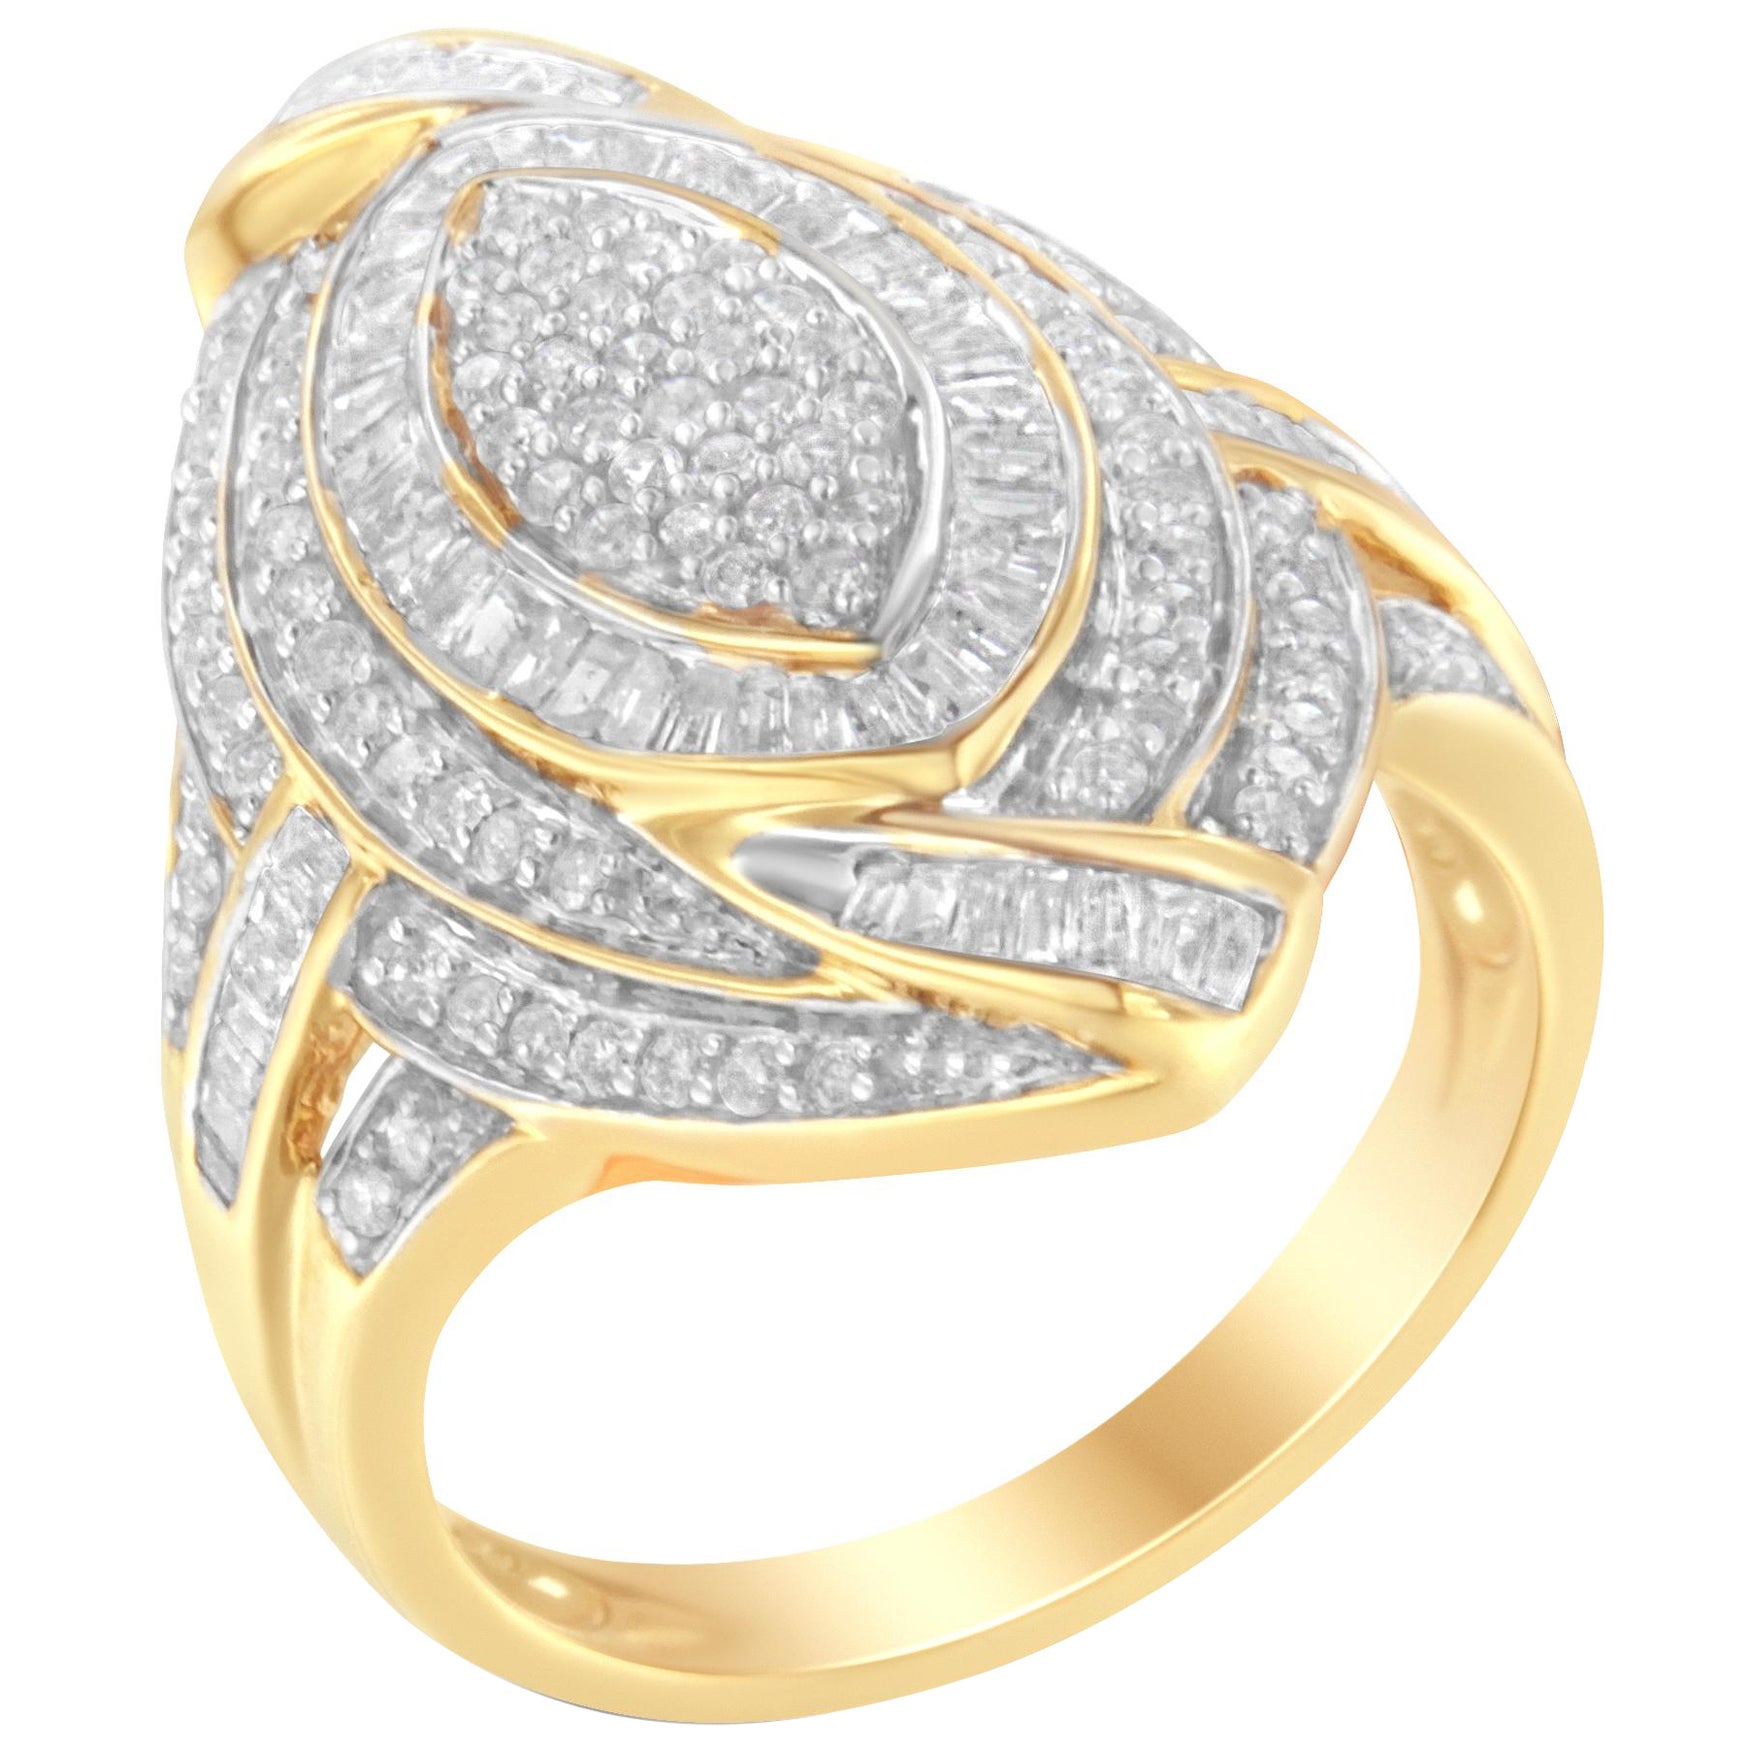 10K Yellow Gold 1.0 Cttw Diamond Cocktail Ring For Sale